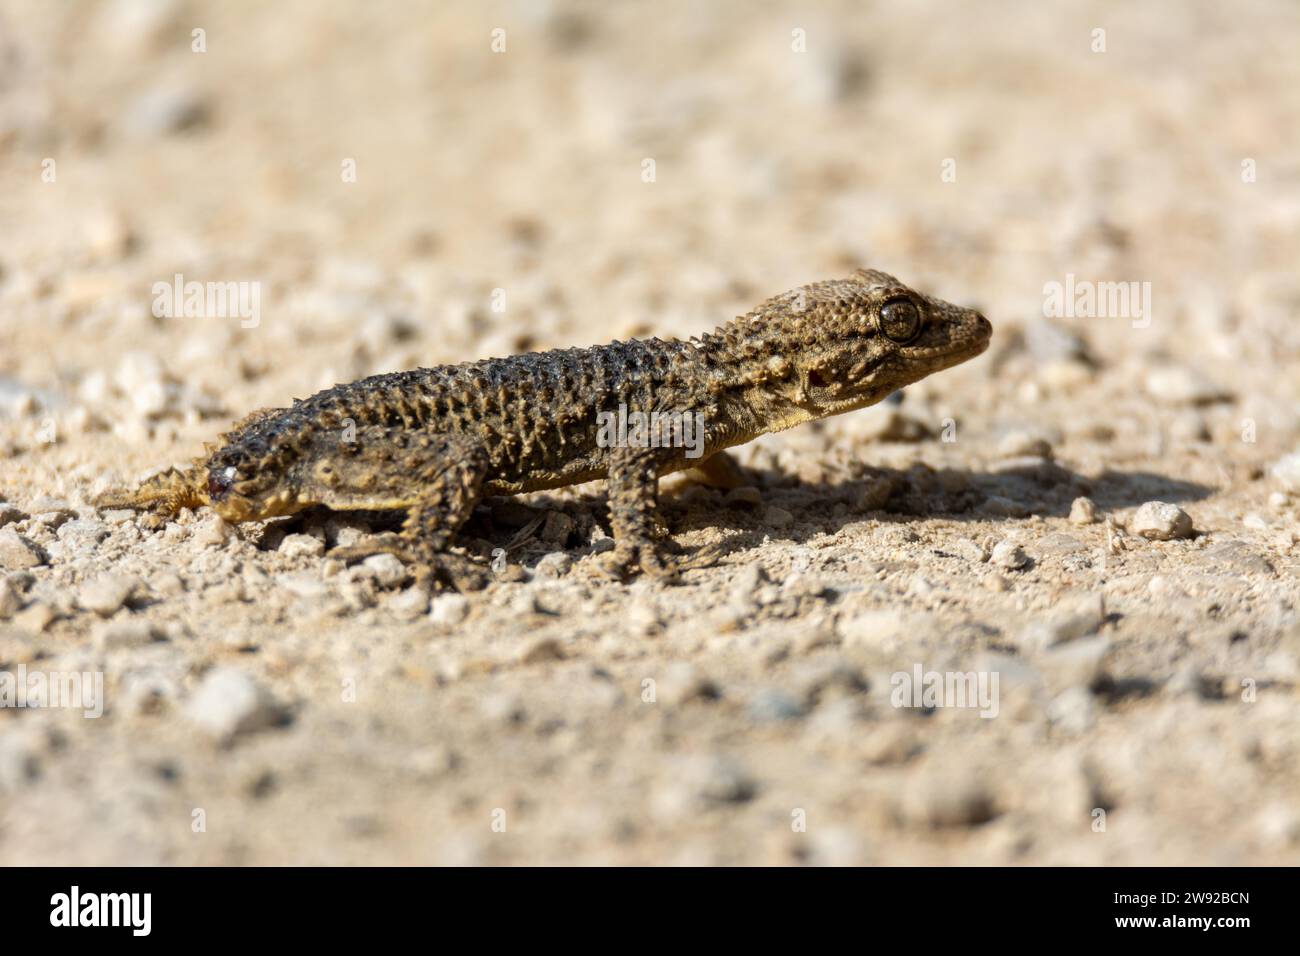 Ground level view of a reptile, the brown gecko (Tarentola mauritanica), close-up photograph Stock Photo